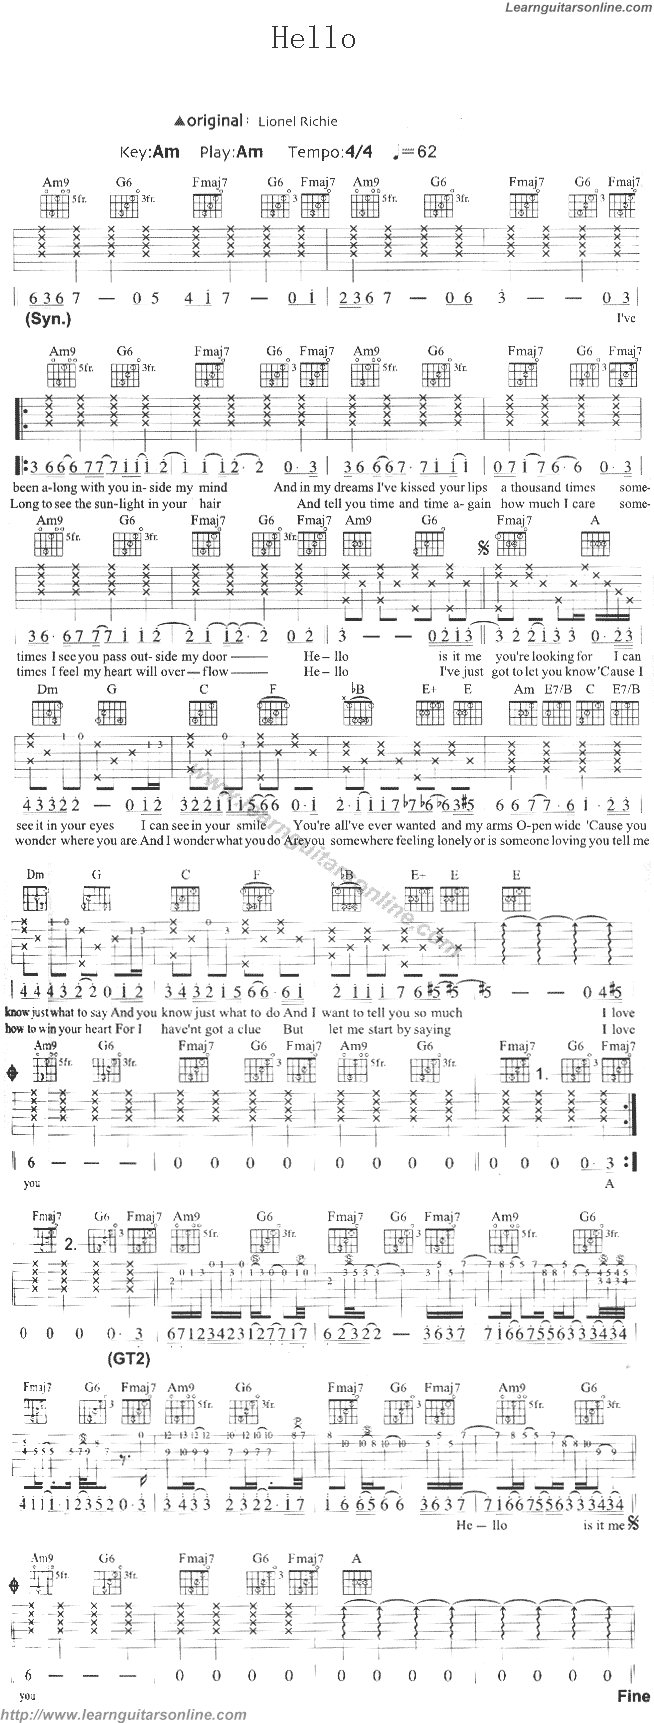 Hello by Lionel Richie Guitar Tabs Chords Solo Sheet Music Free